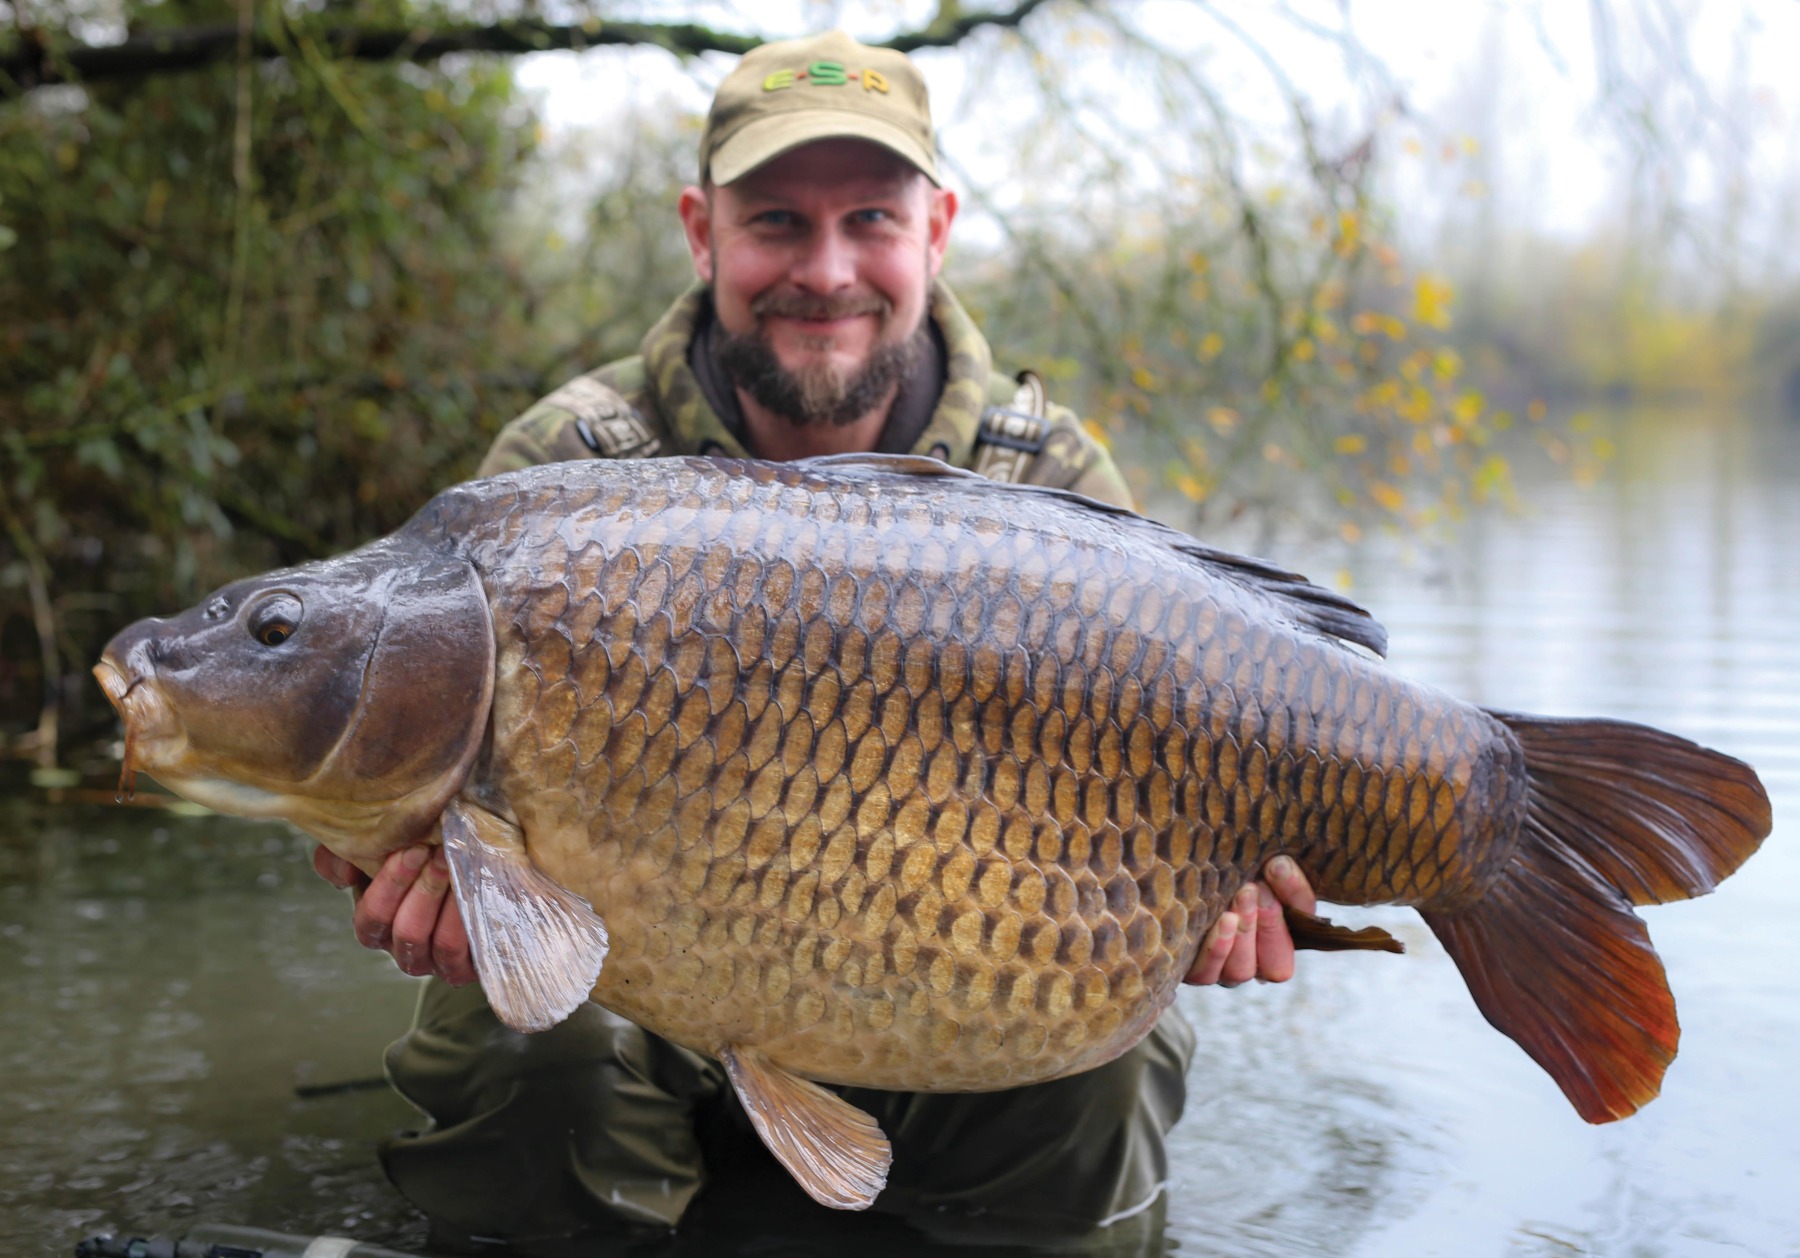 Once I’d cracked the baiting approach at Farriers, the fishing was simply mind-blowing! 